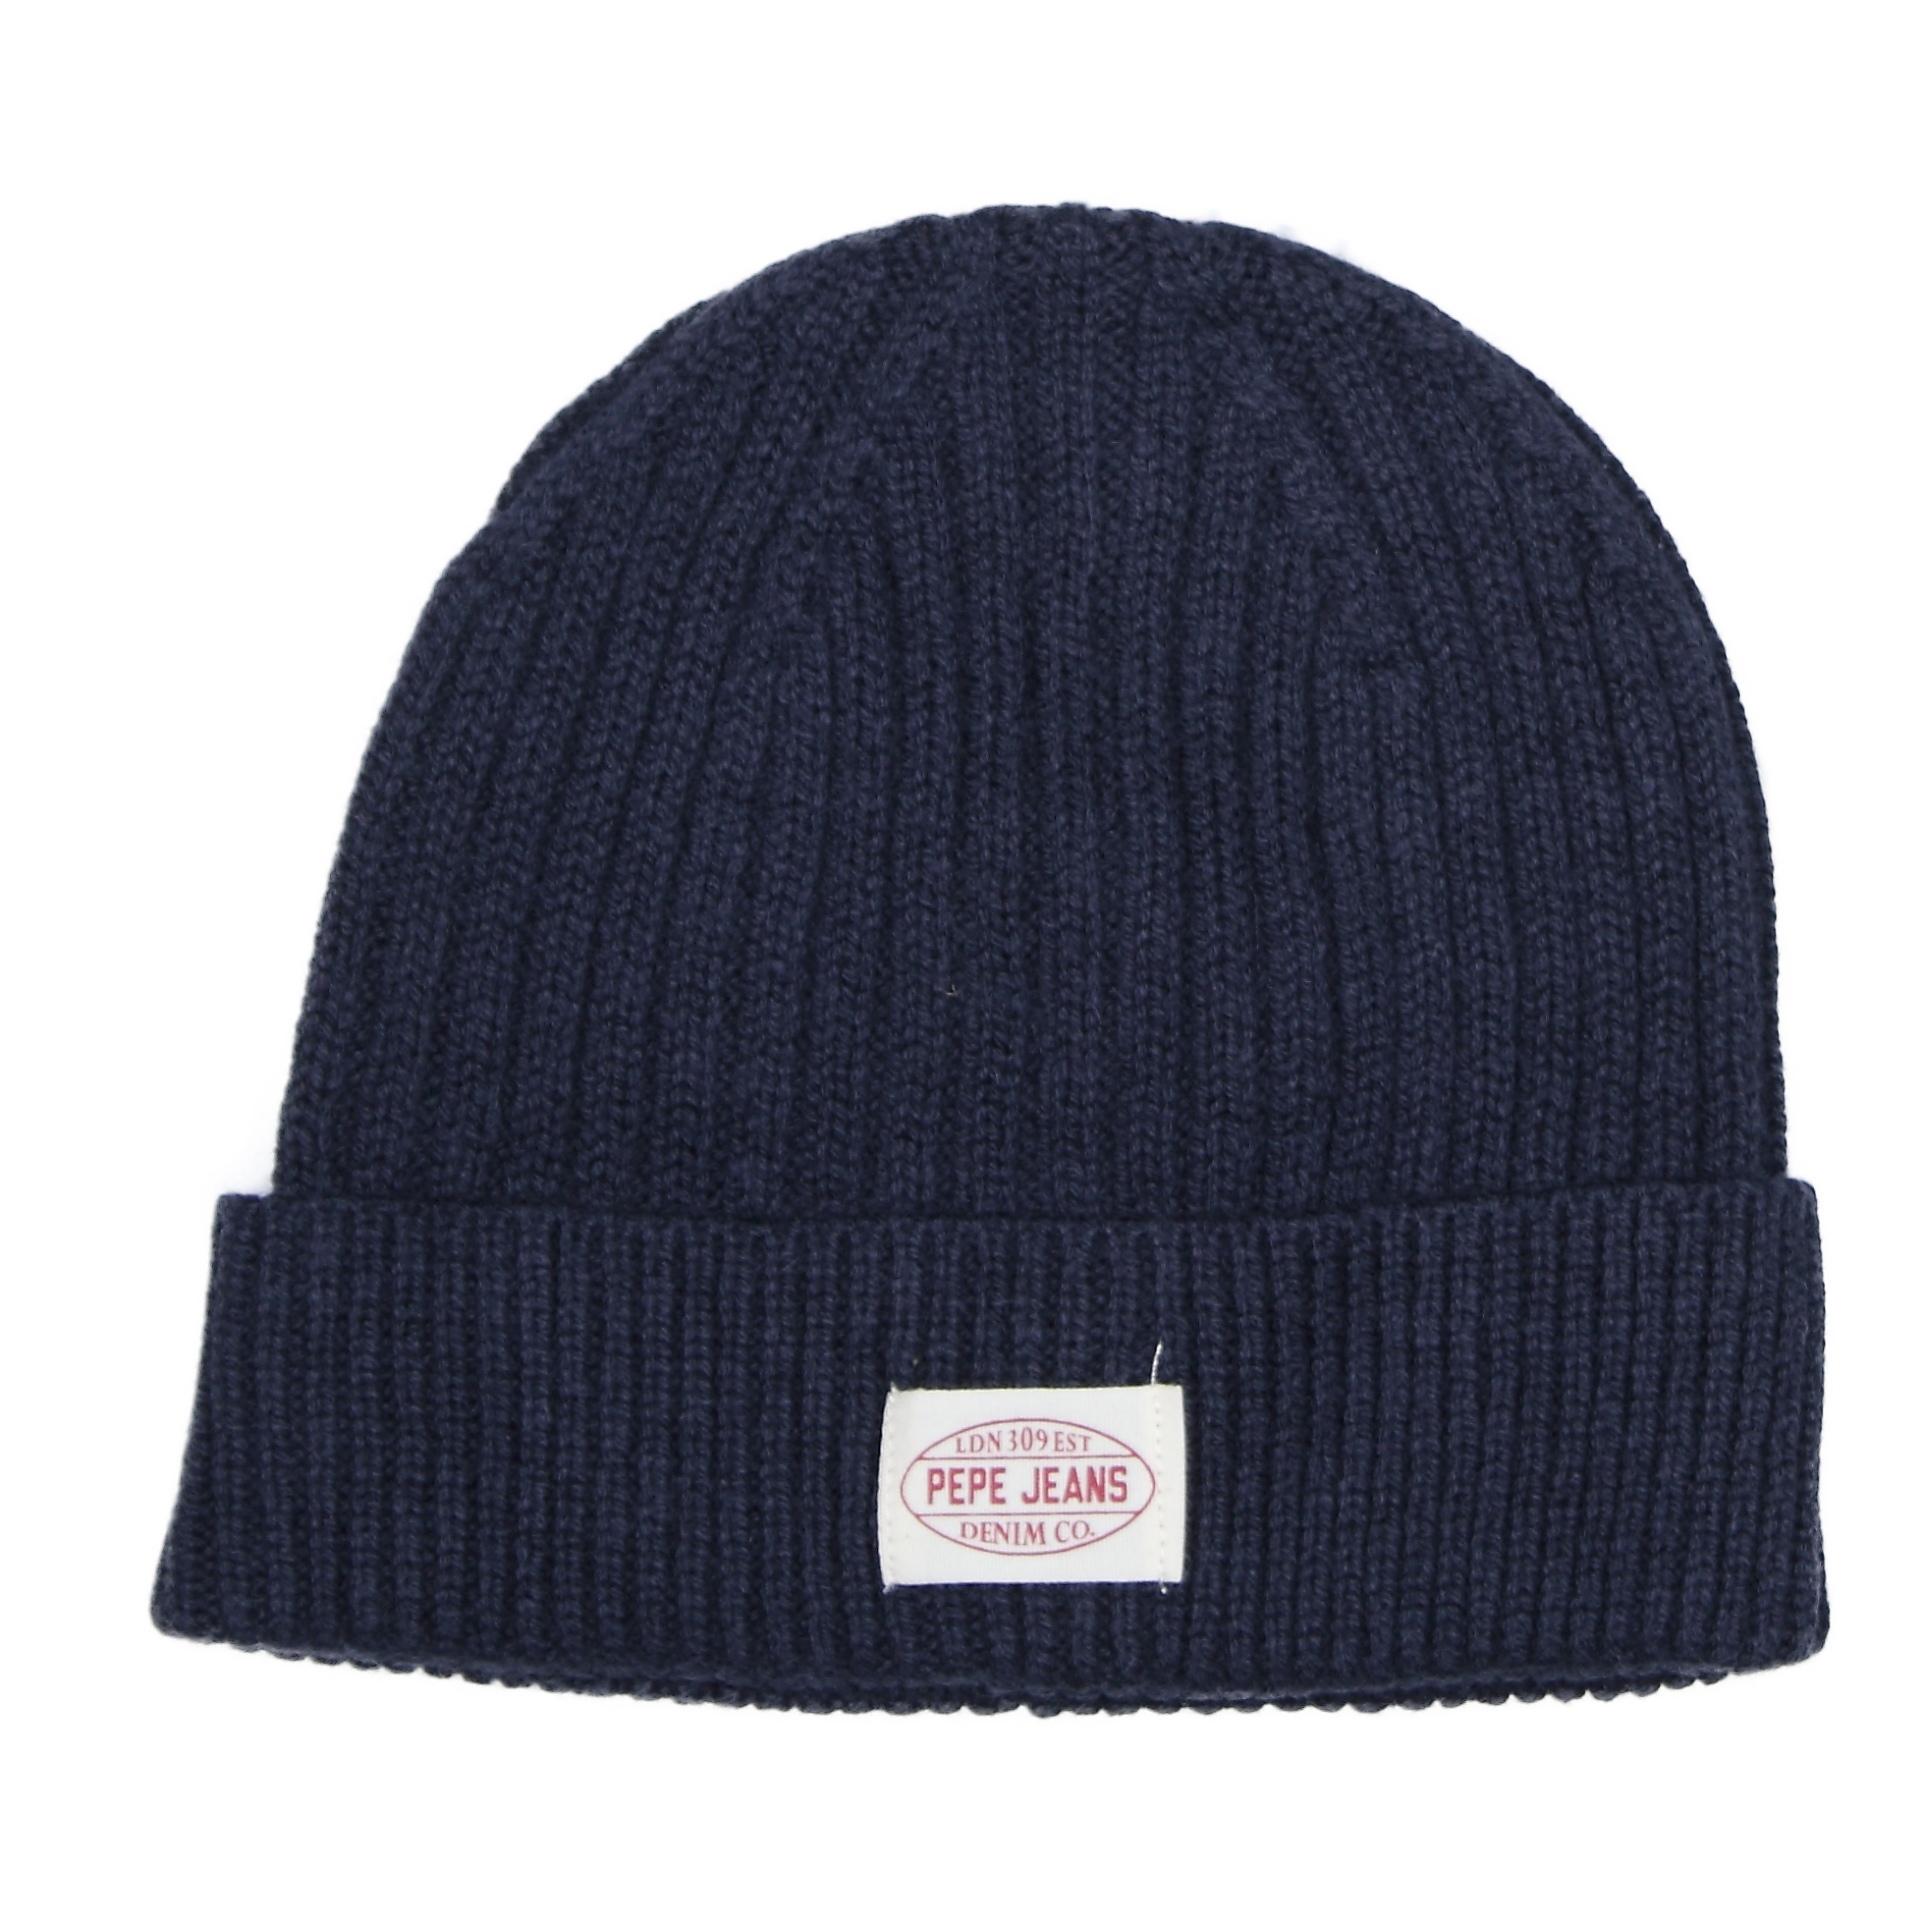 https://www.leadermode.com/211843/pepe-jeans-rony-hat-pm040494-571-scout-blue.jpg